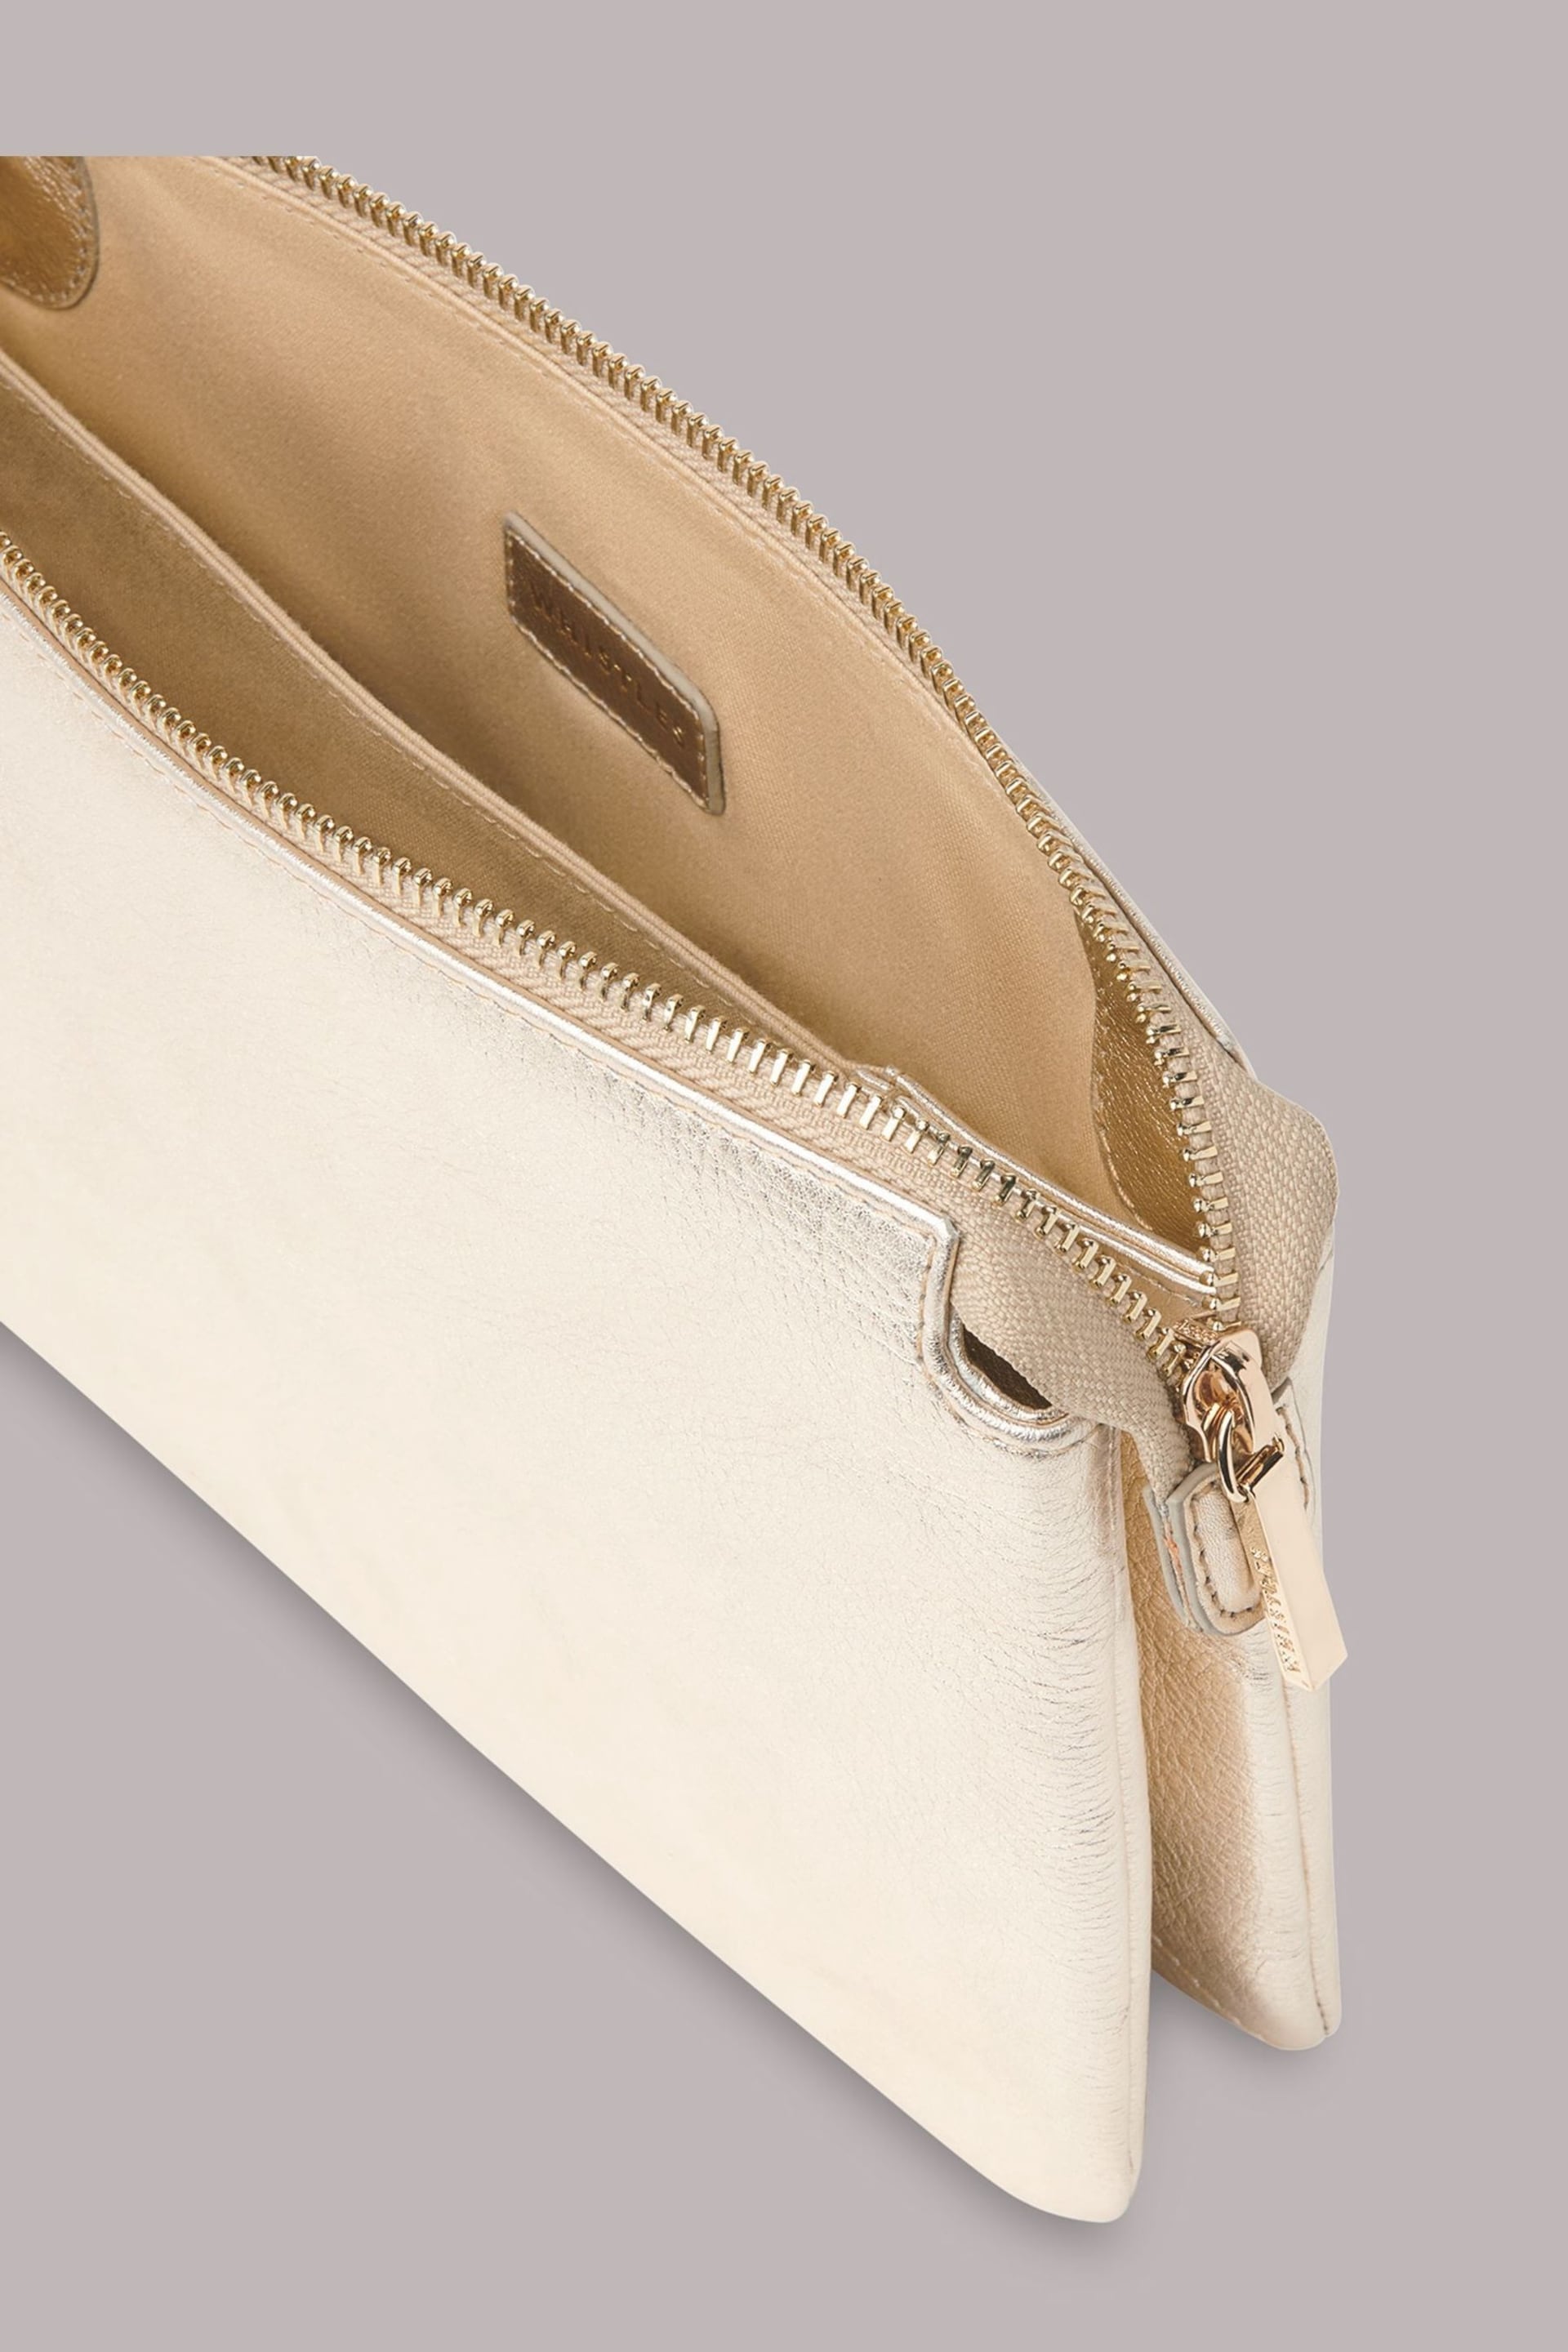 Whistles Gold Elita Double Pouch Clutch - Image 3 of 4